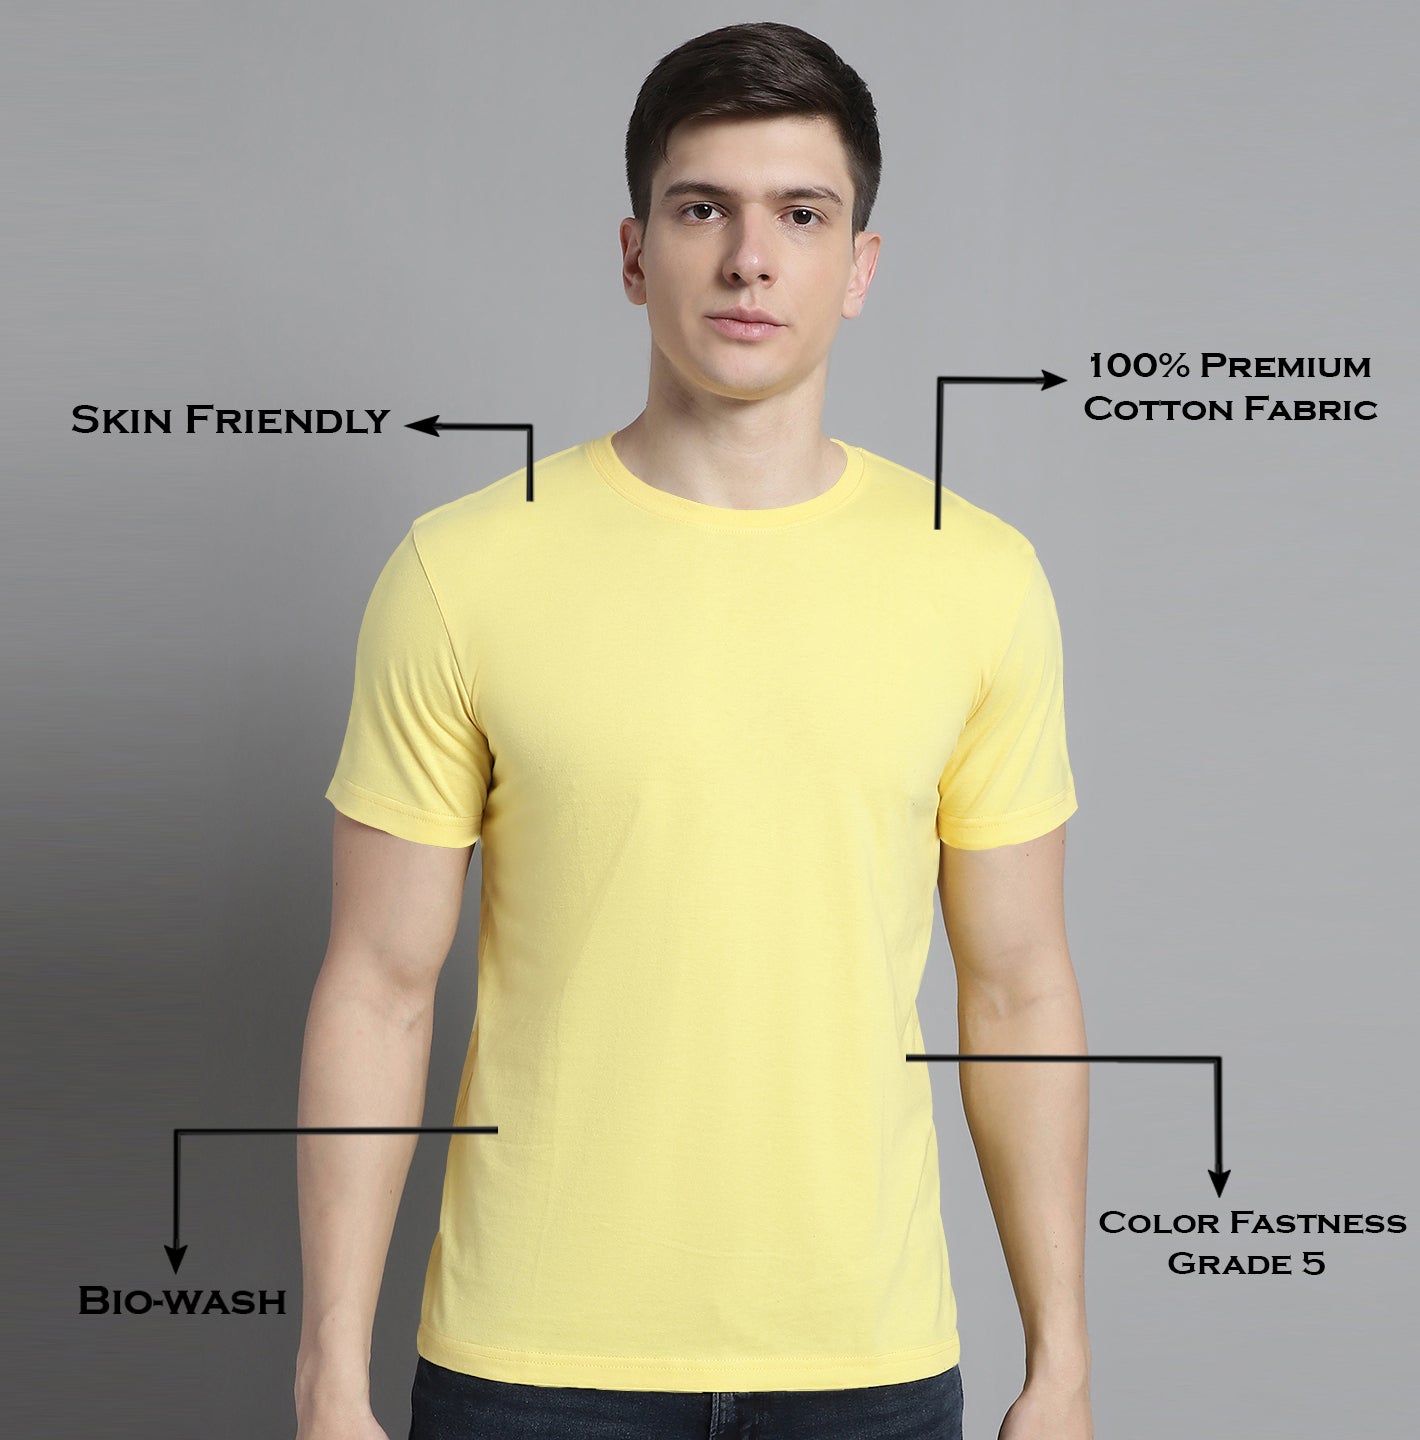 Fbar Solid Half sleeves round neck T-shirt - Friskers